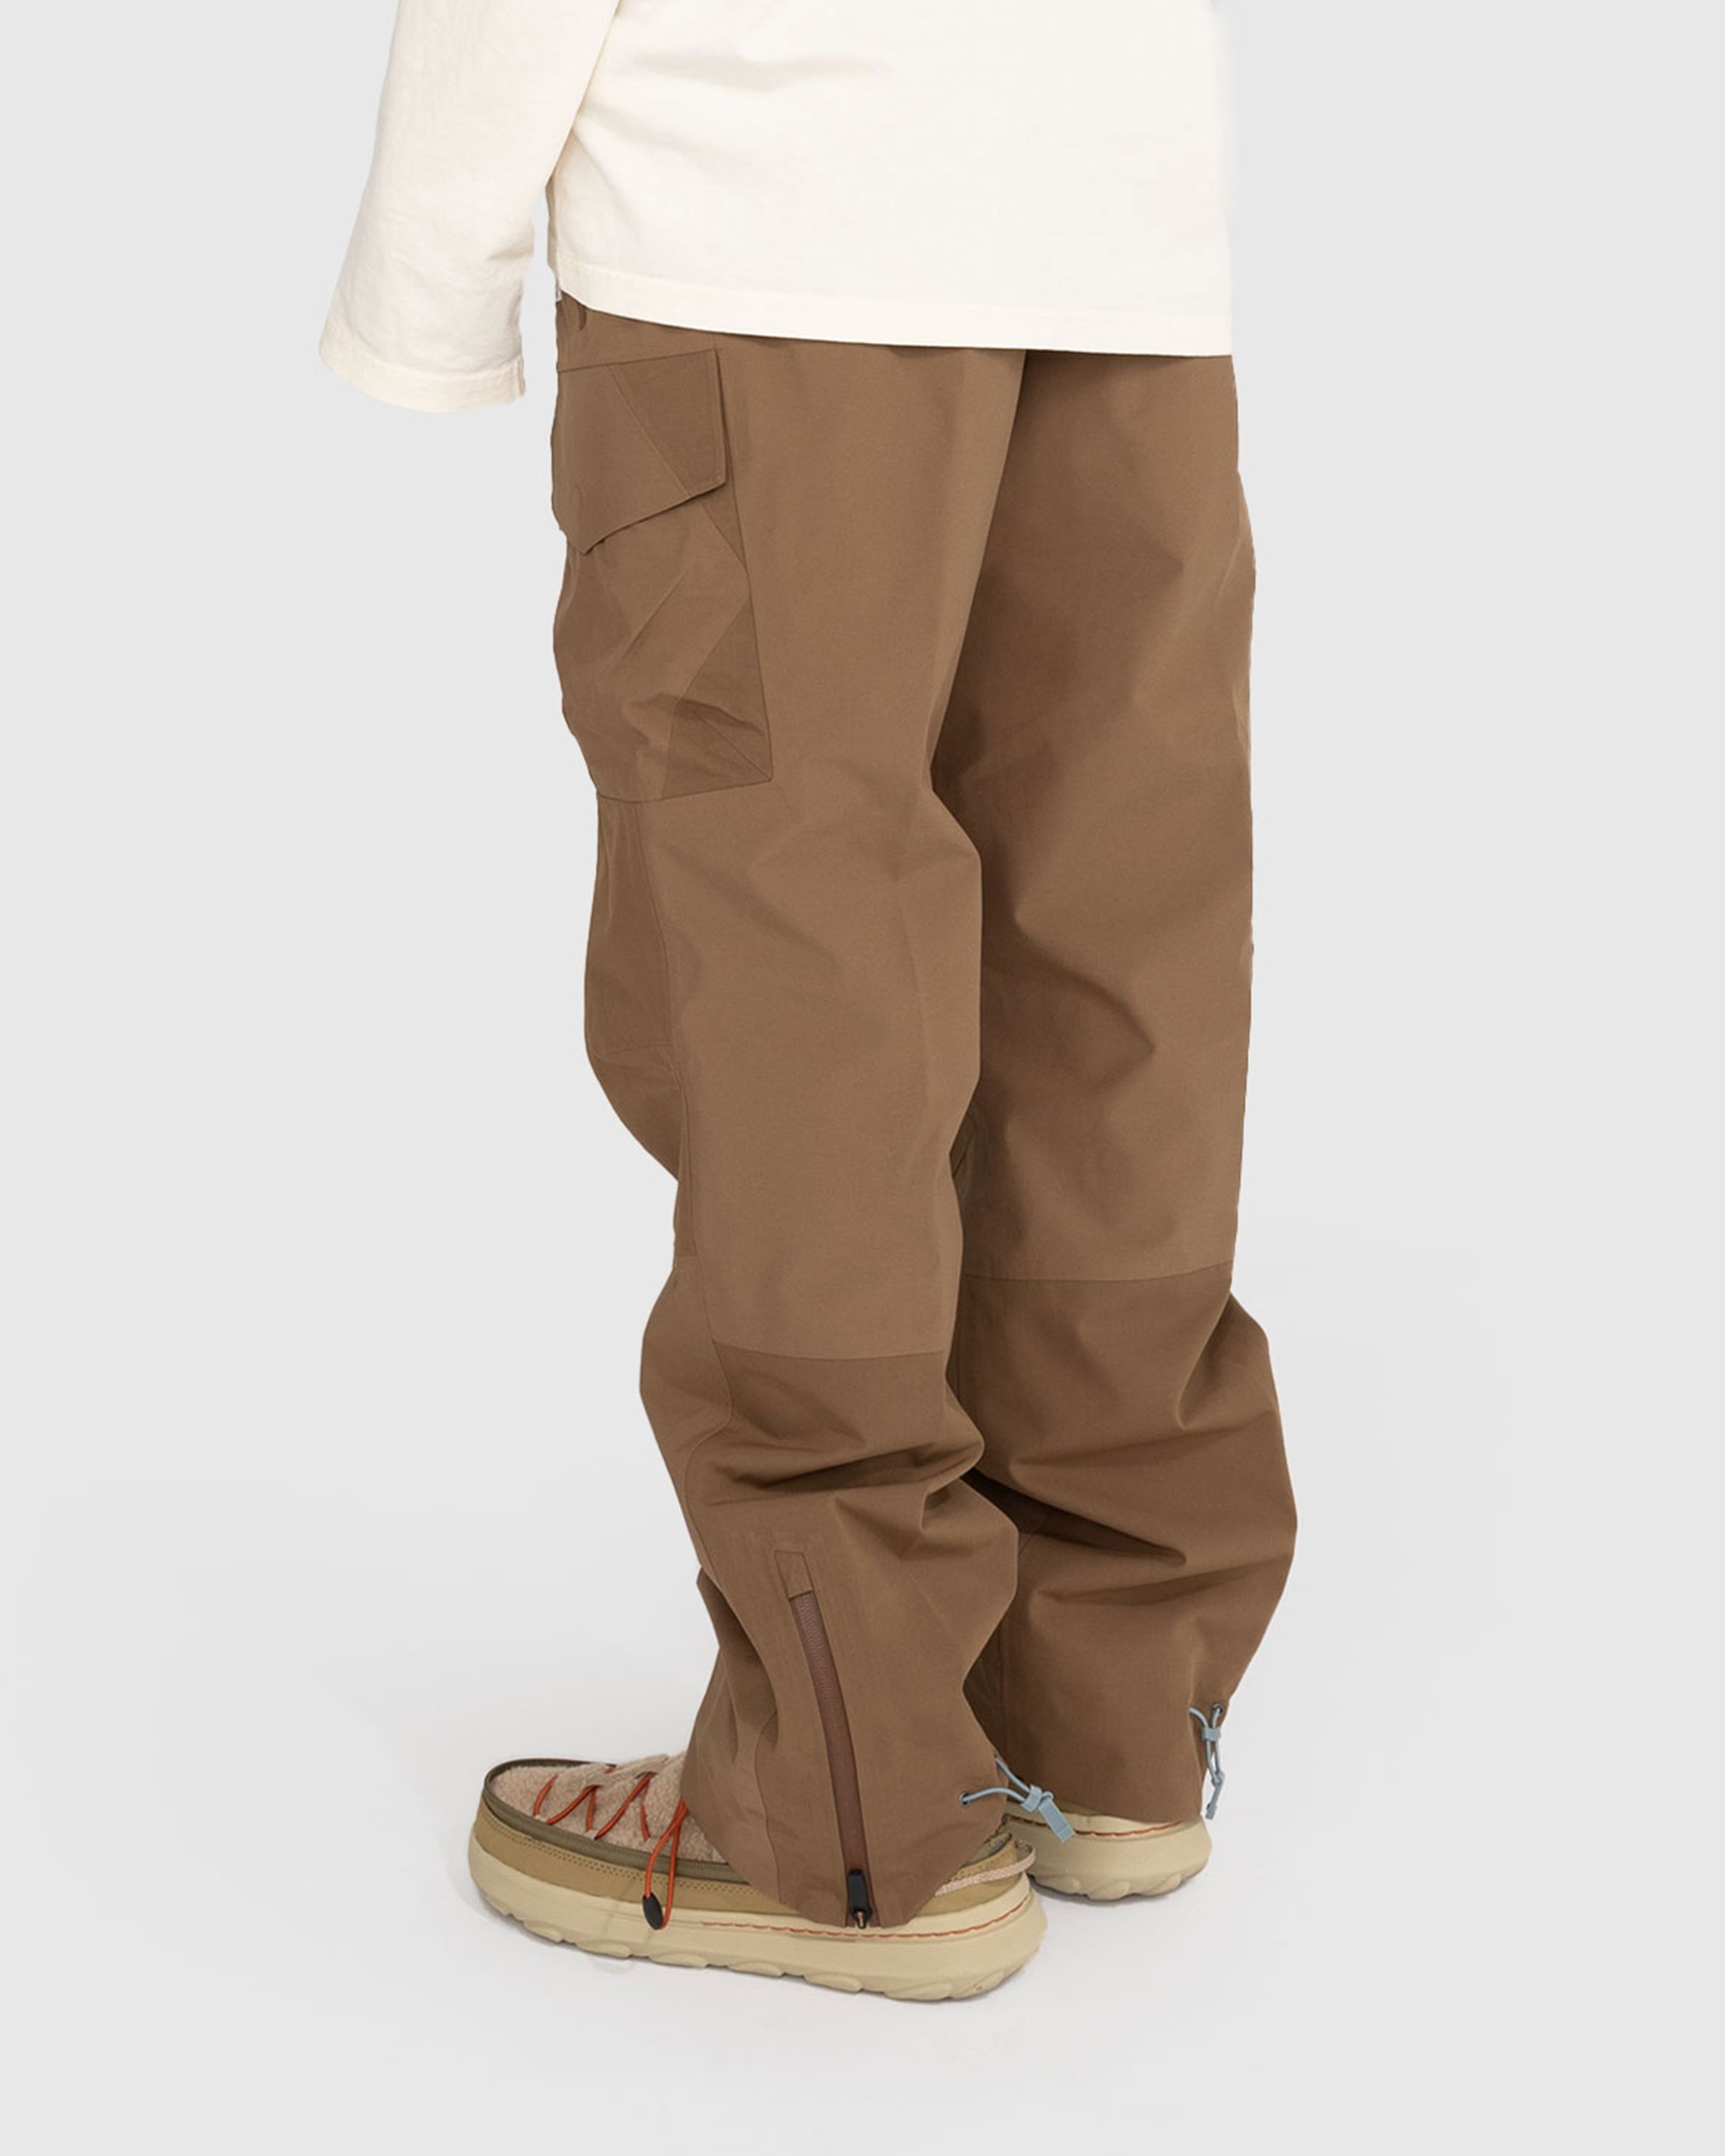 The North Face x UNDERCOVER - Geodesic Shell Pants Sepia Brown - Clothing - Brown - Image 3